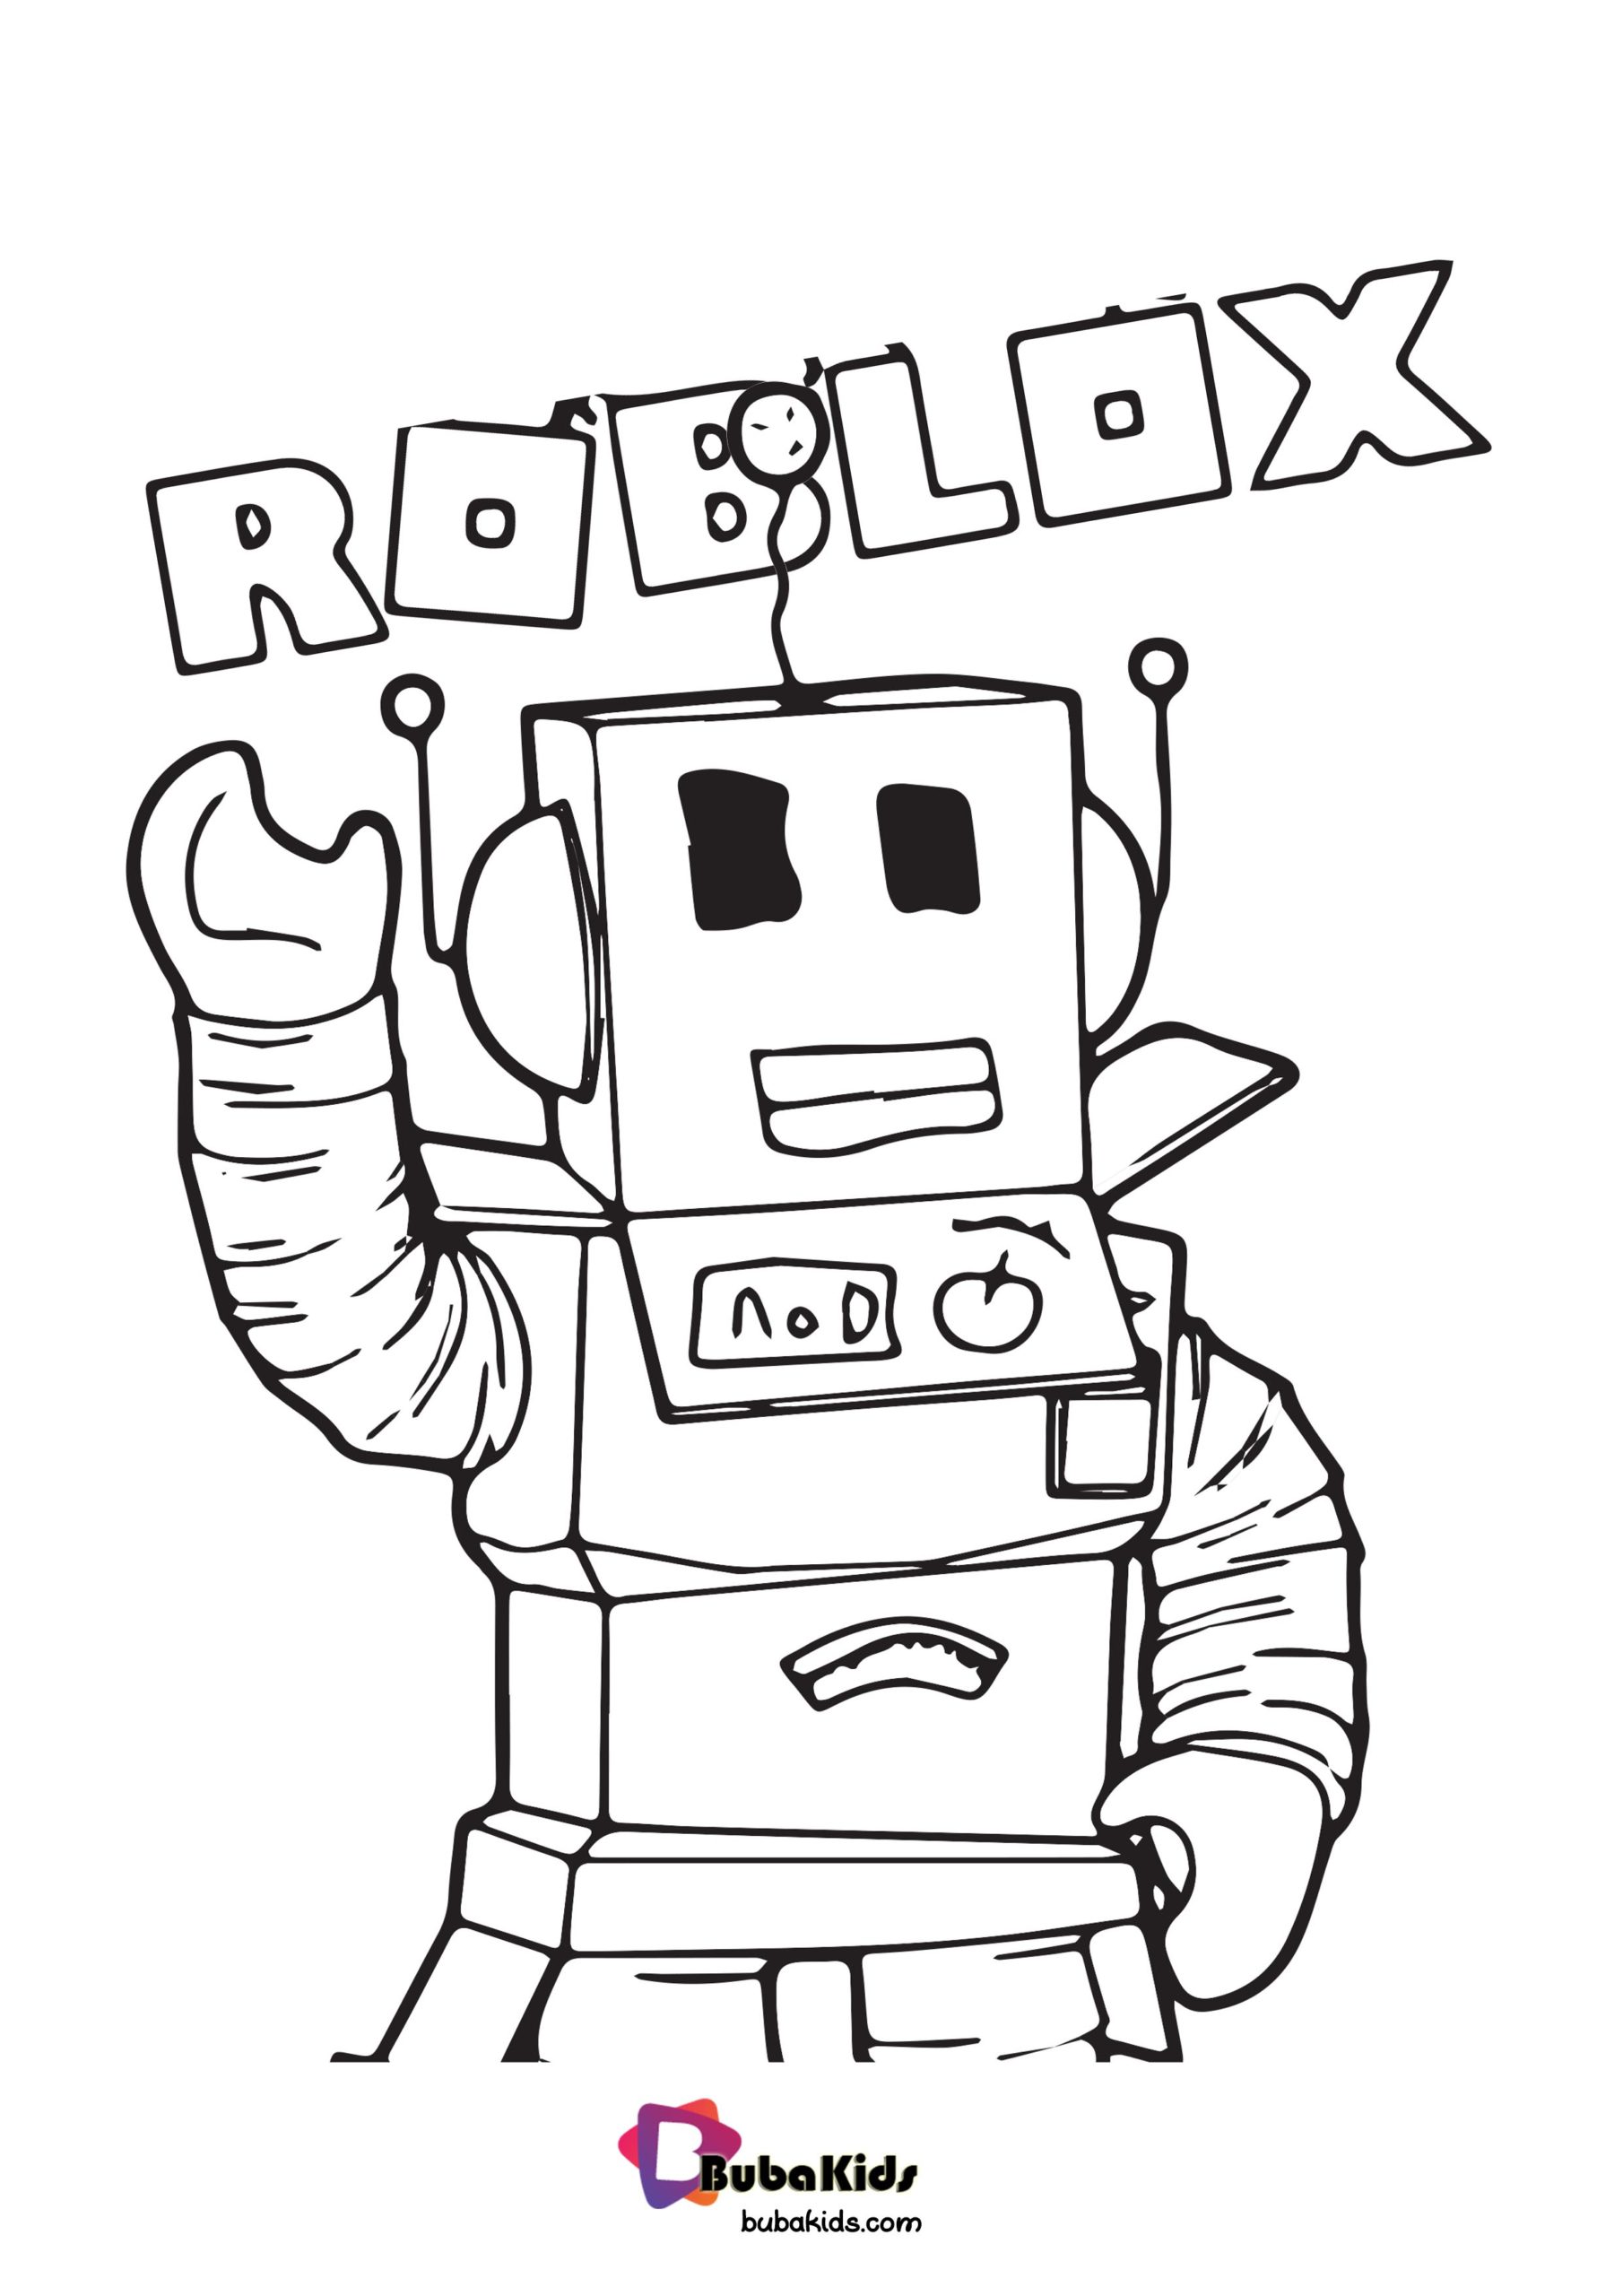 Roblox Coloring Page Wallpaper